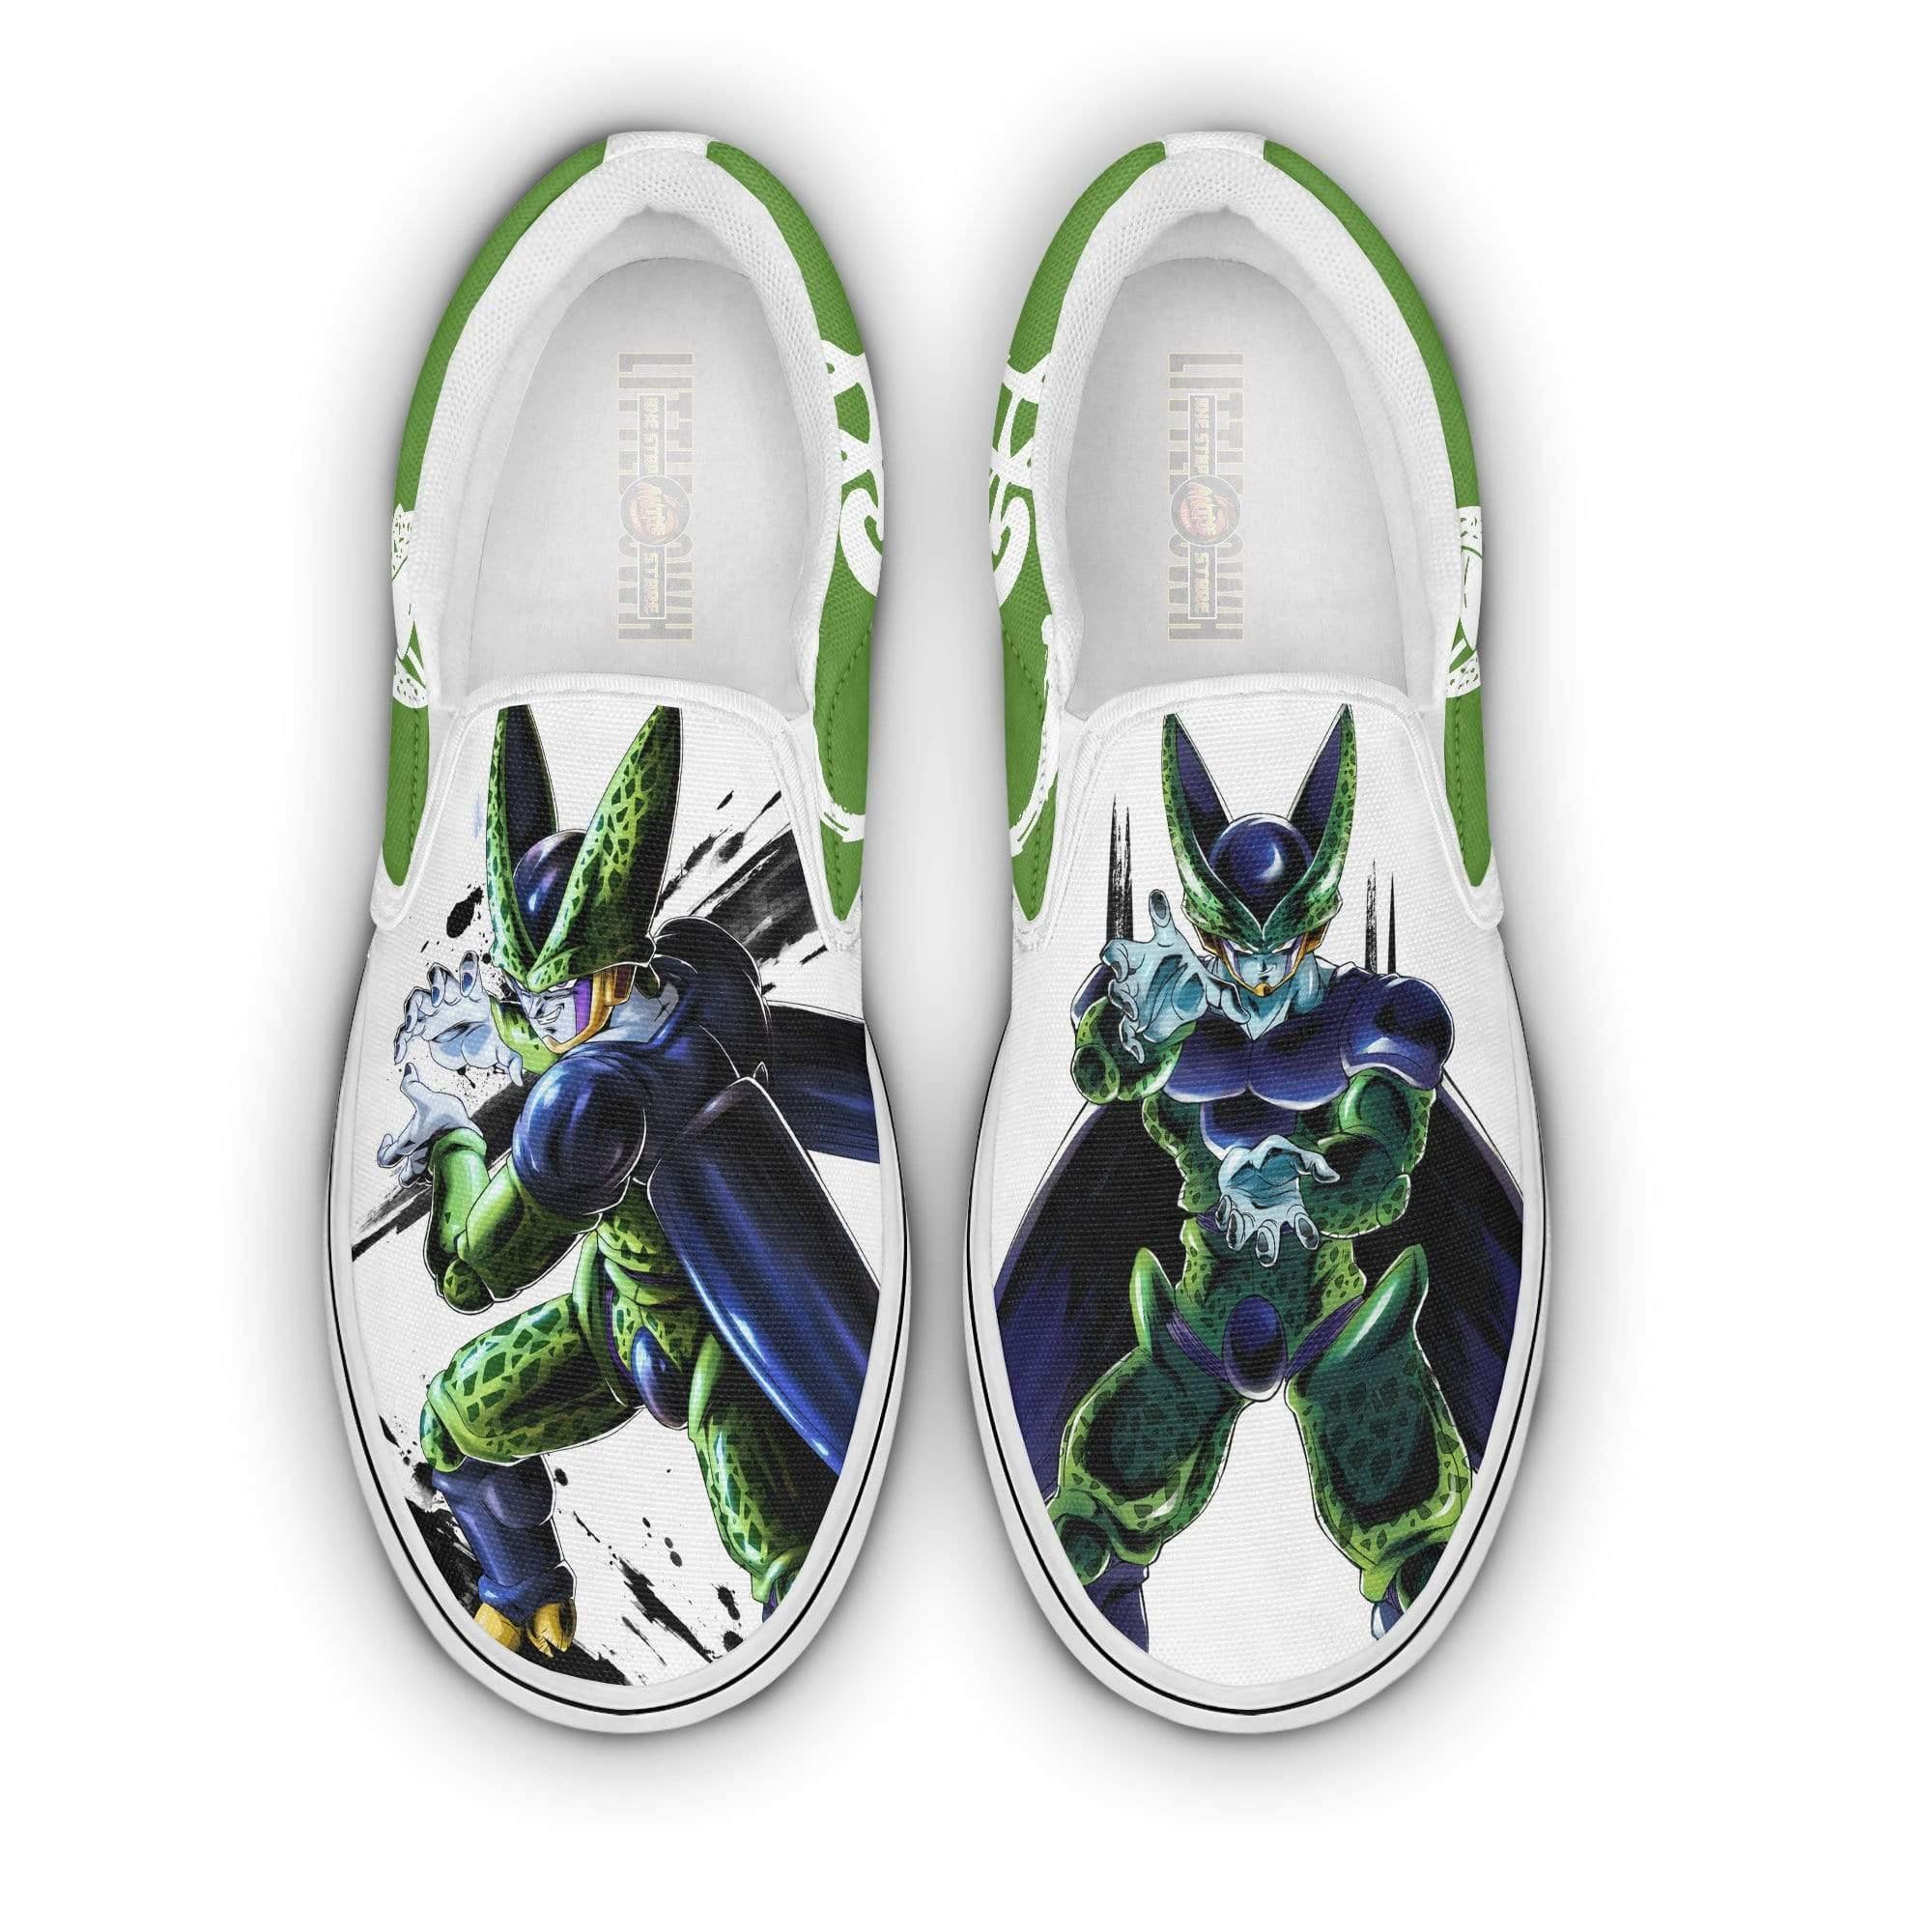 Cell Custom Dragon Ball Z Flat Sneakers Anime Shoes